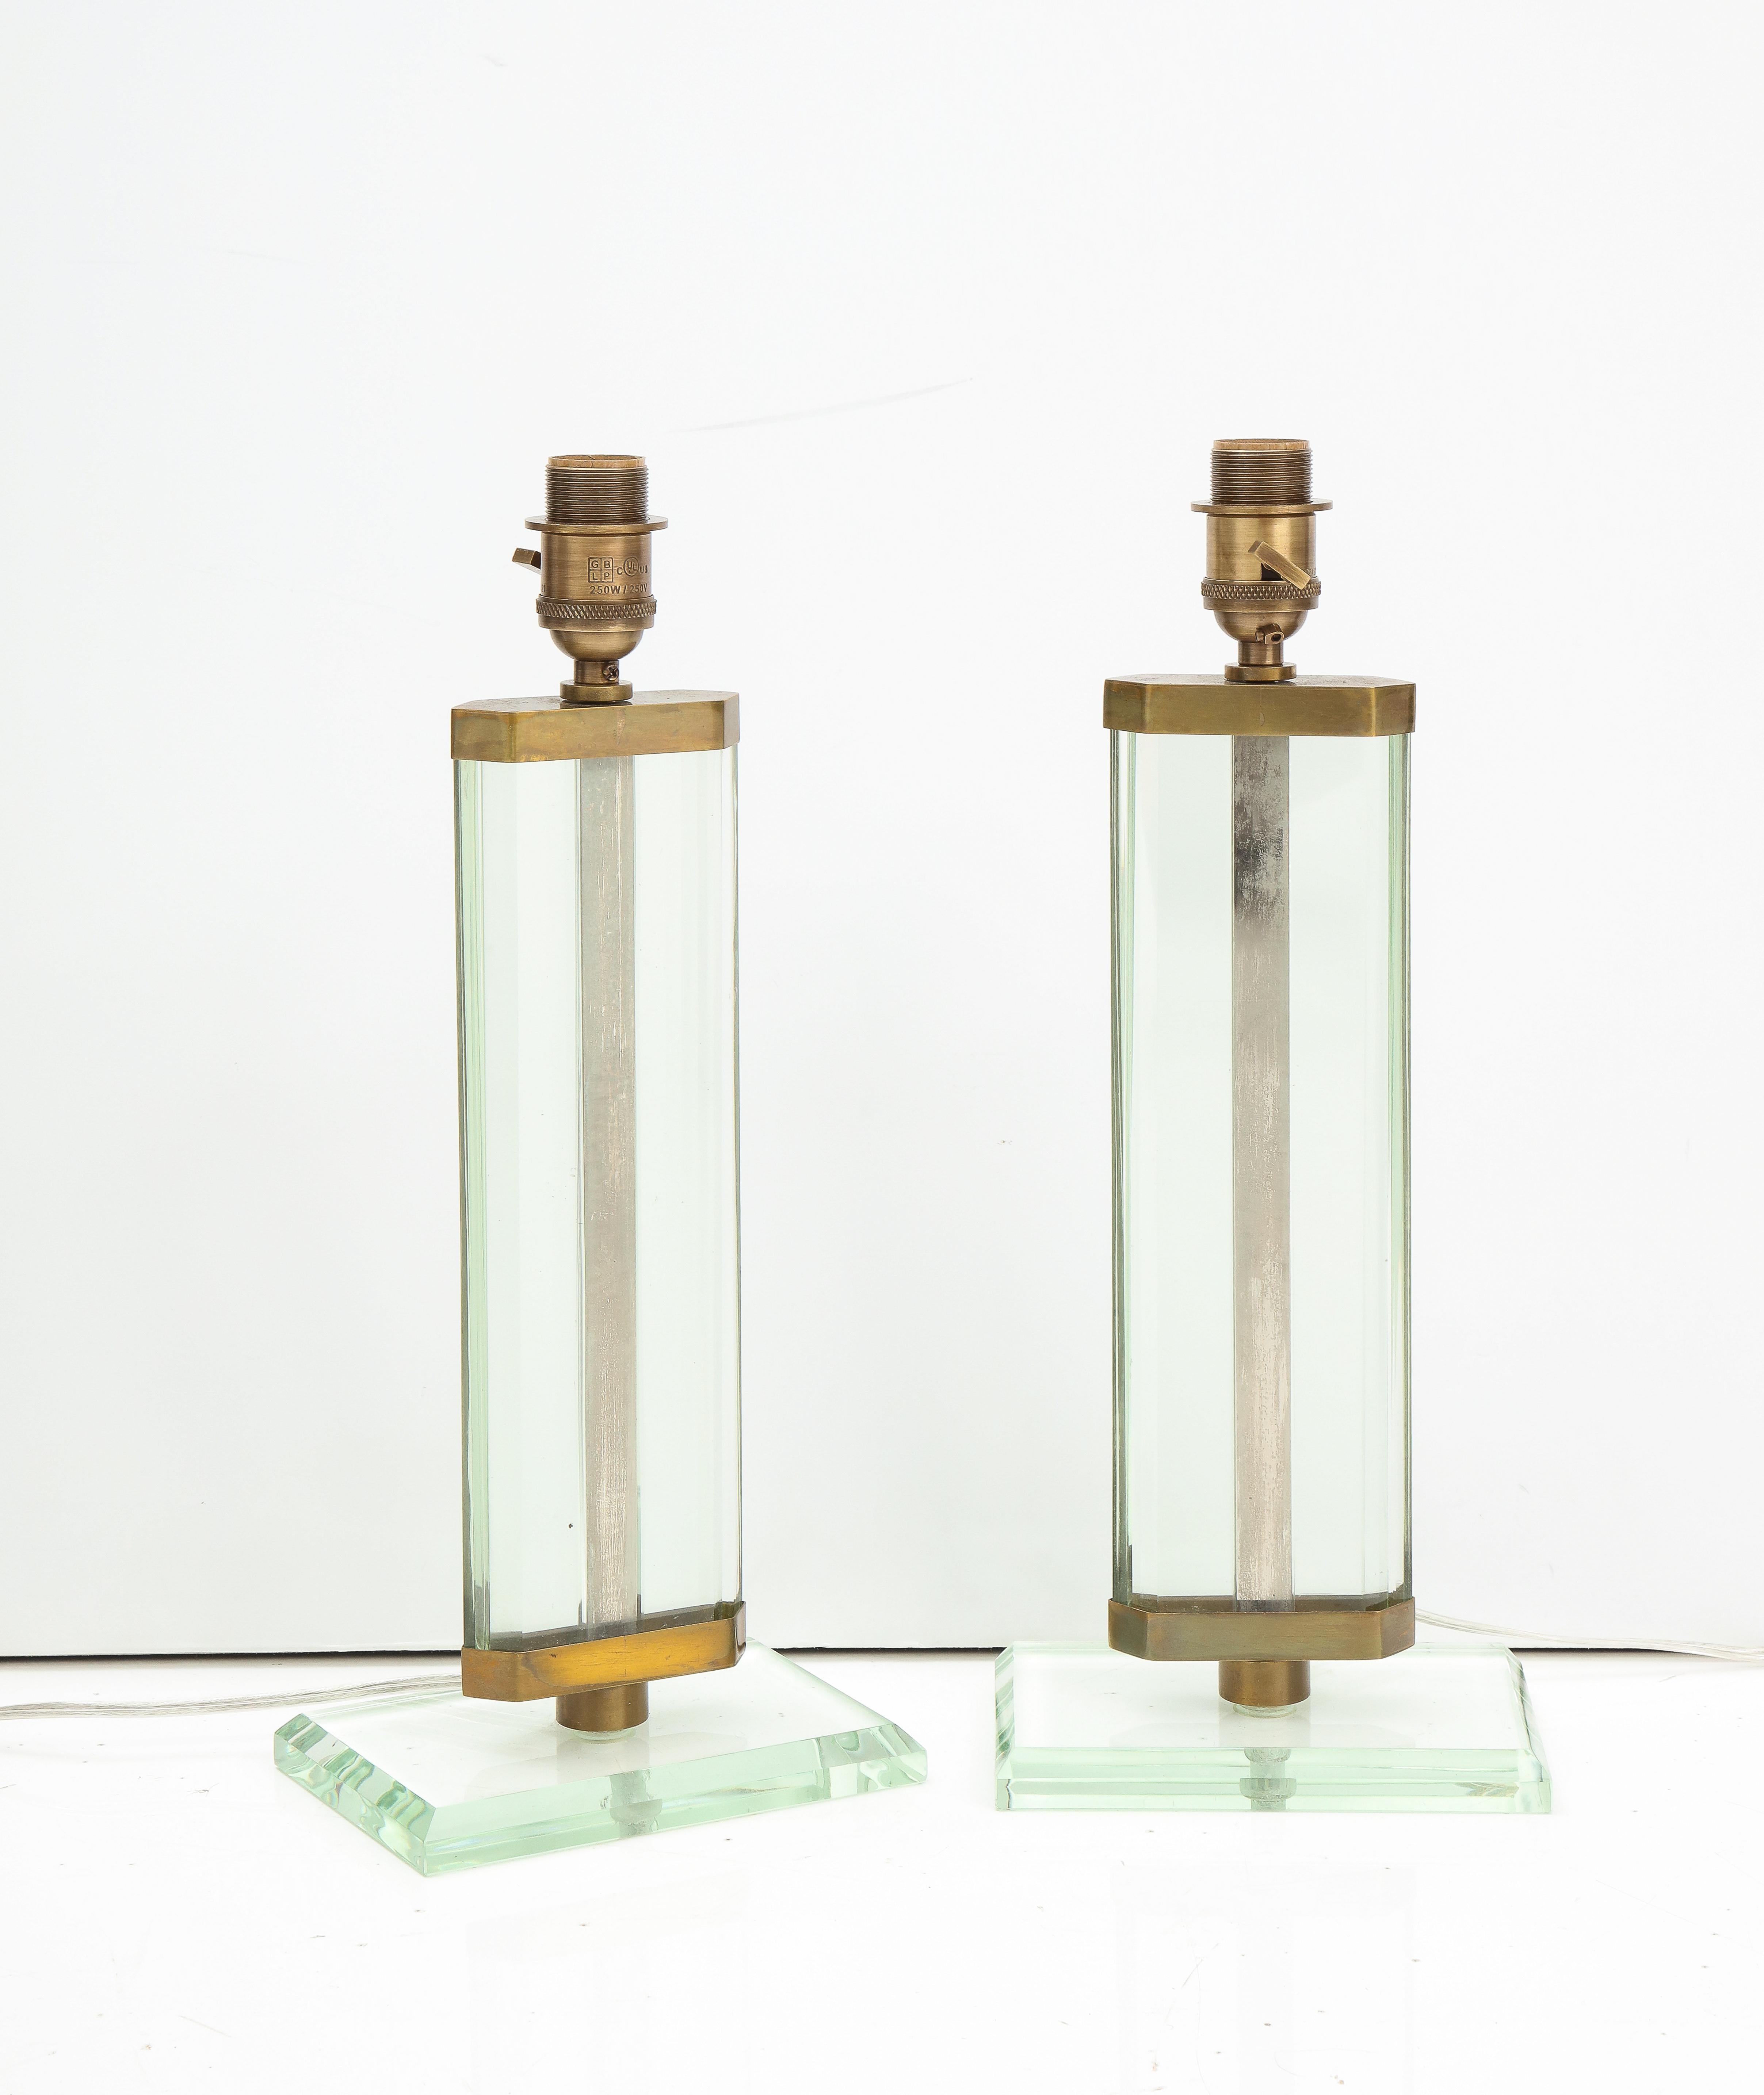 Pietro Chiesa Pair of Fontana Arte Glass & Brass Lamps, Italy, 1940's For Sale 5